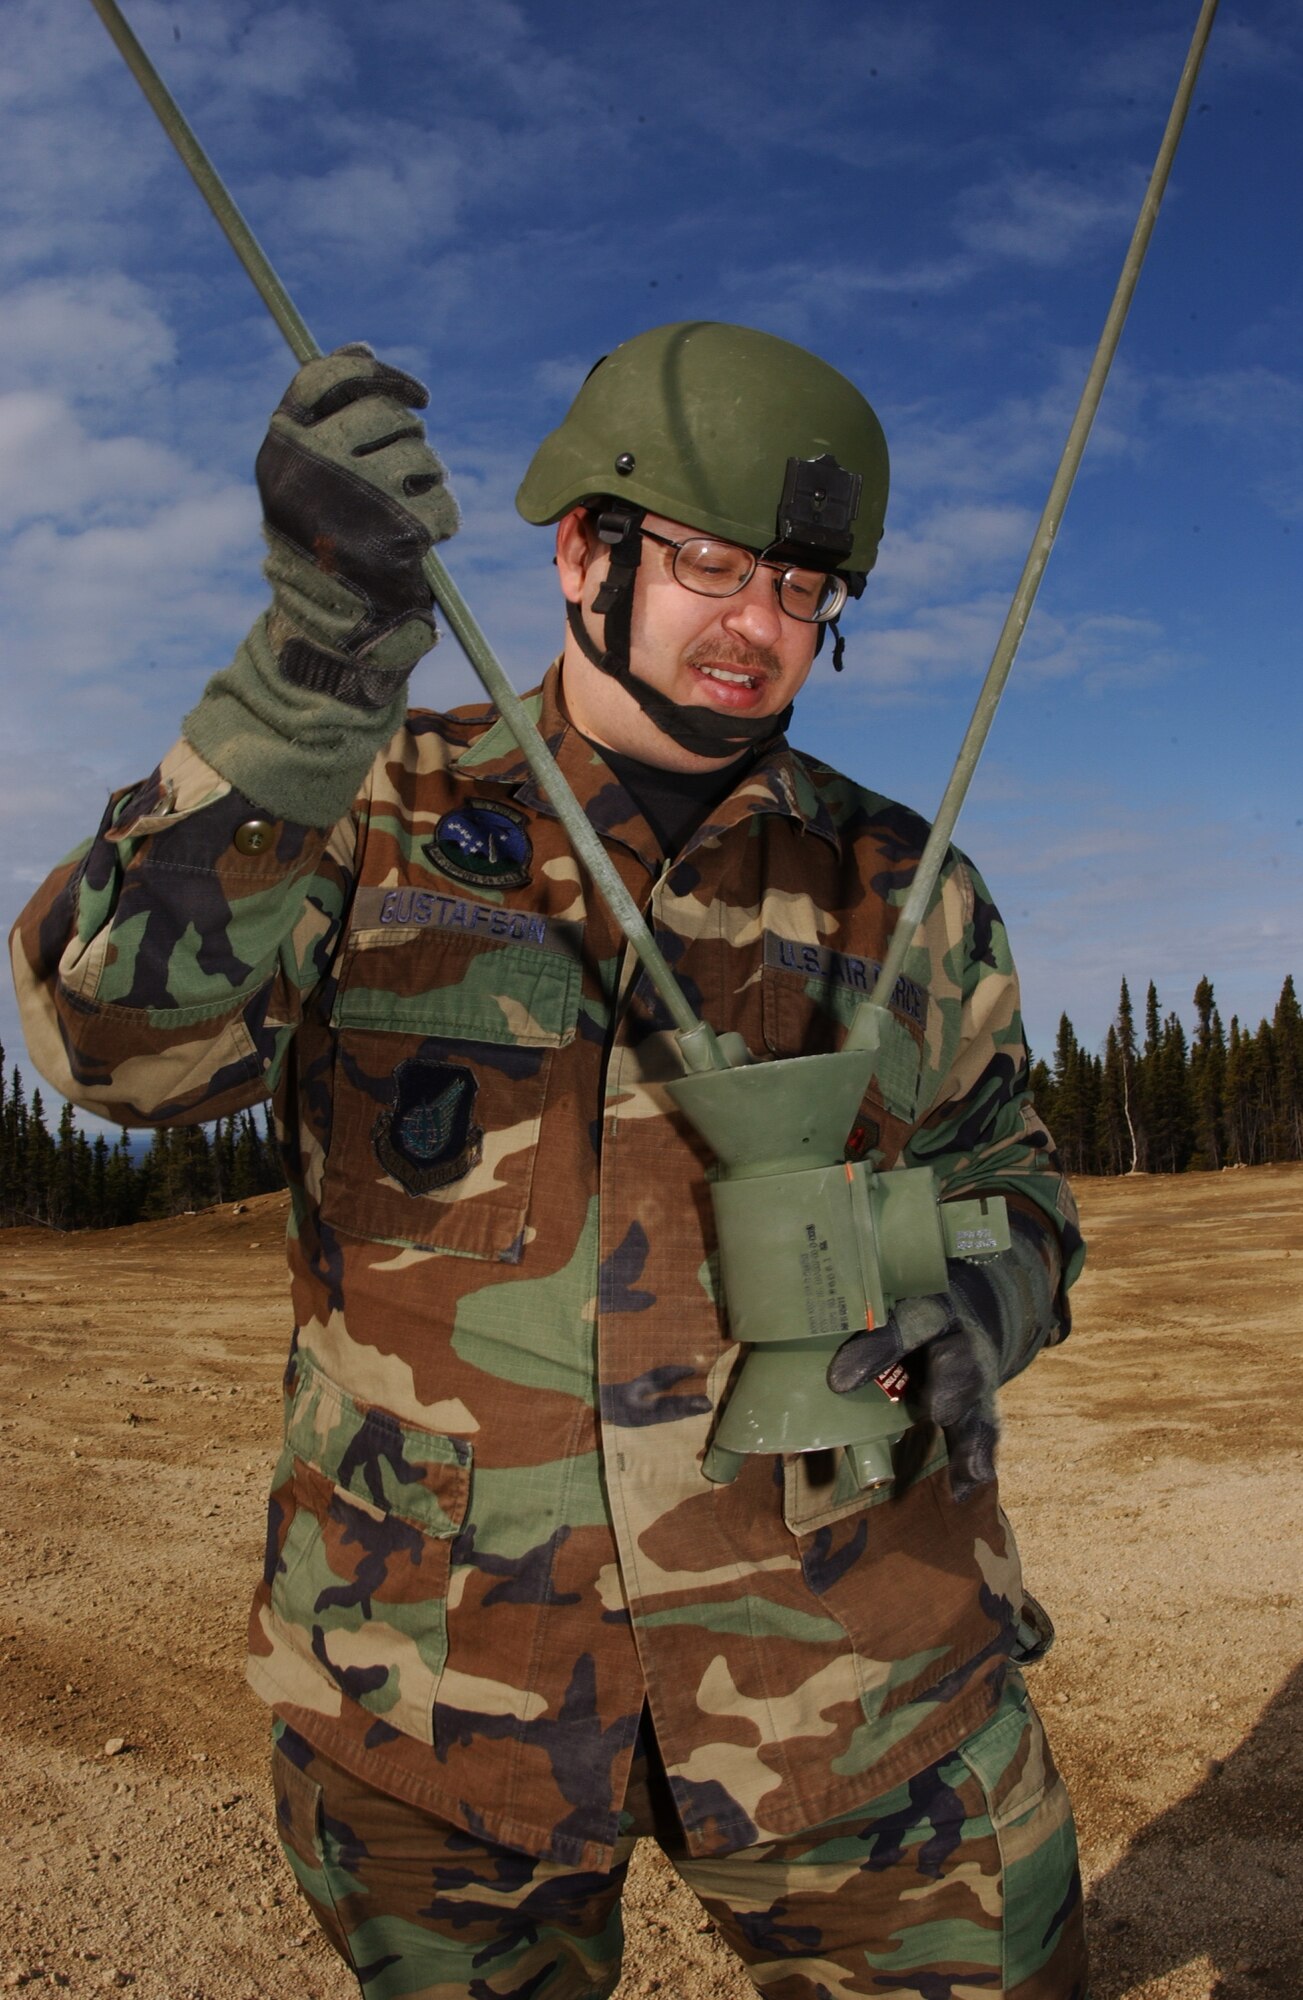 EIELSON AIR FORCE BASE, Alaska -- Staff Sgt. Richard Gustafson, 3rd Air Support Operations Squadron, screws rods into a an OE-254 FM Radio Antenna to enable communication with Army personnel May 15 during Operation URSA Minor. ASOS members completed day one of a three-day field training exercise designed to prepare Airman with hands on combat training and experience before deploying to a combat area. (U.S. Air Force Photo by Airman 1st Class Jonathan Snyder) 